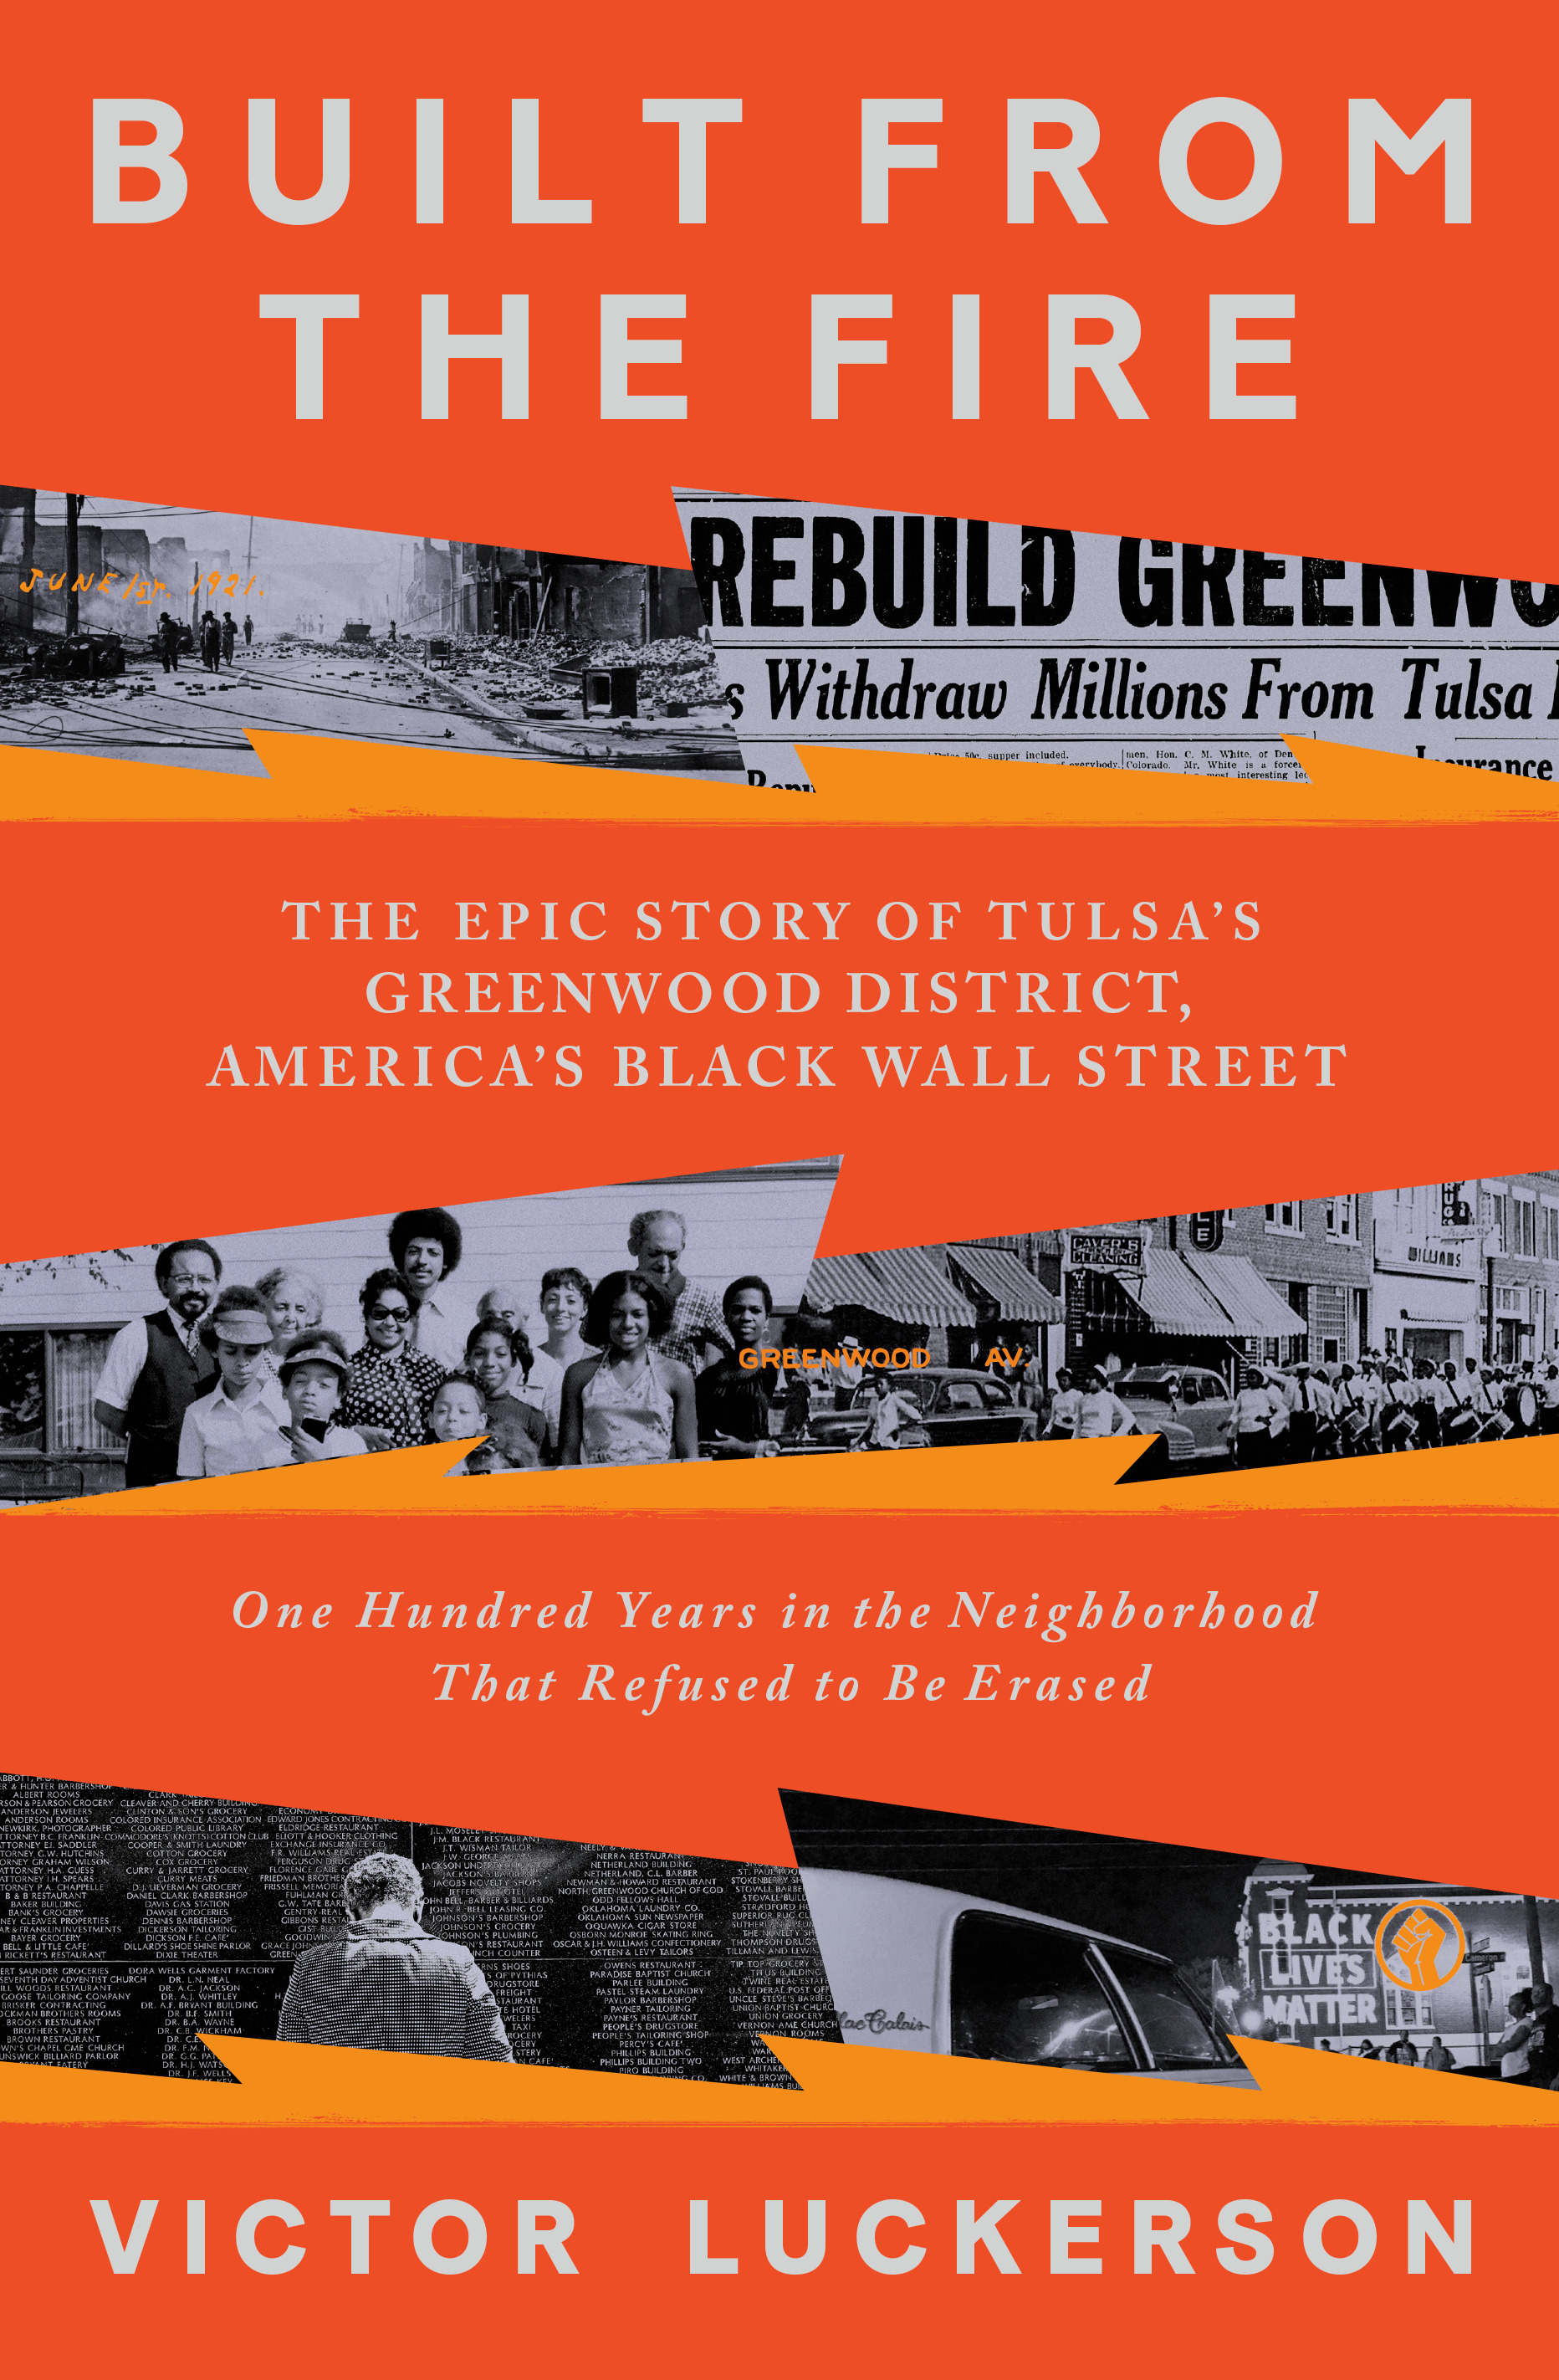 book cover of "Built from the Fire" with historic photos of black citizens and vibrant orange background